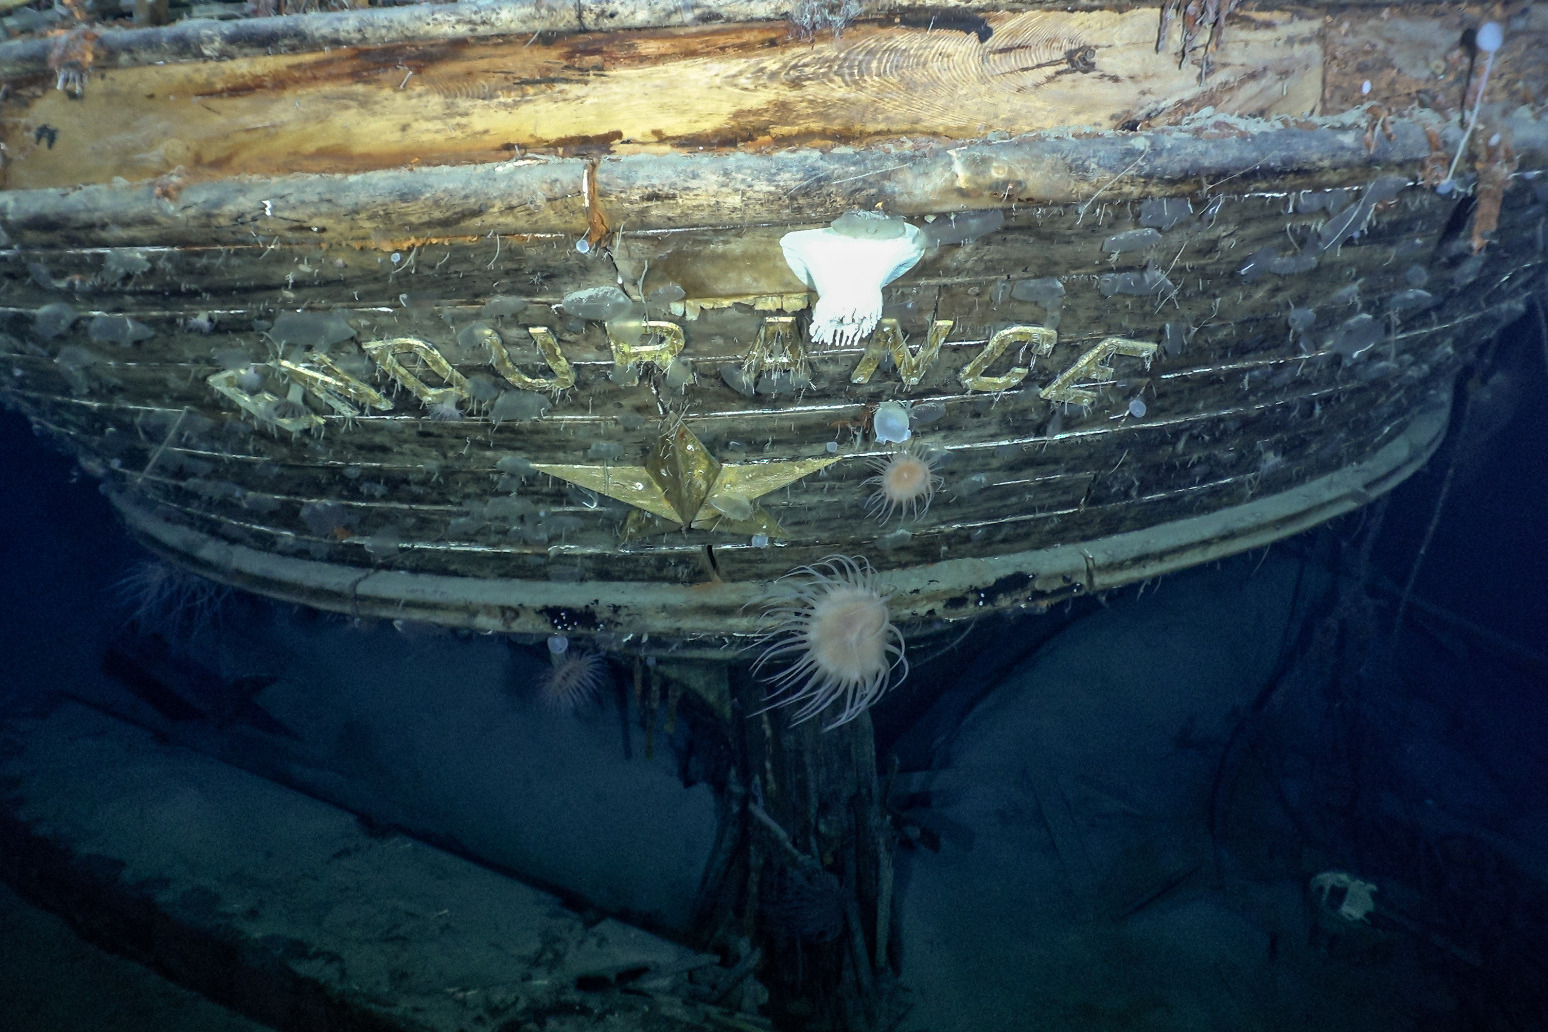 Shackletons lost ship Endurance found 107 years after sinking off Antarctica